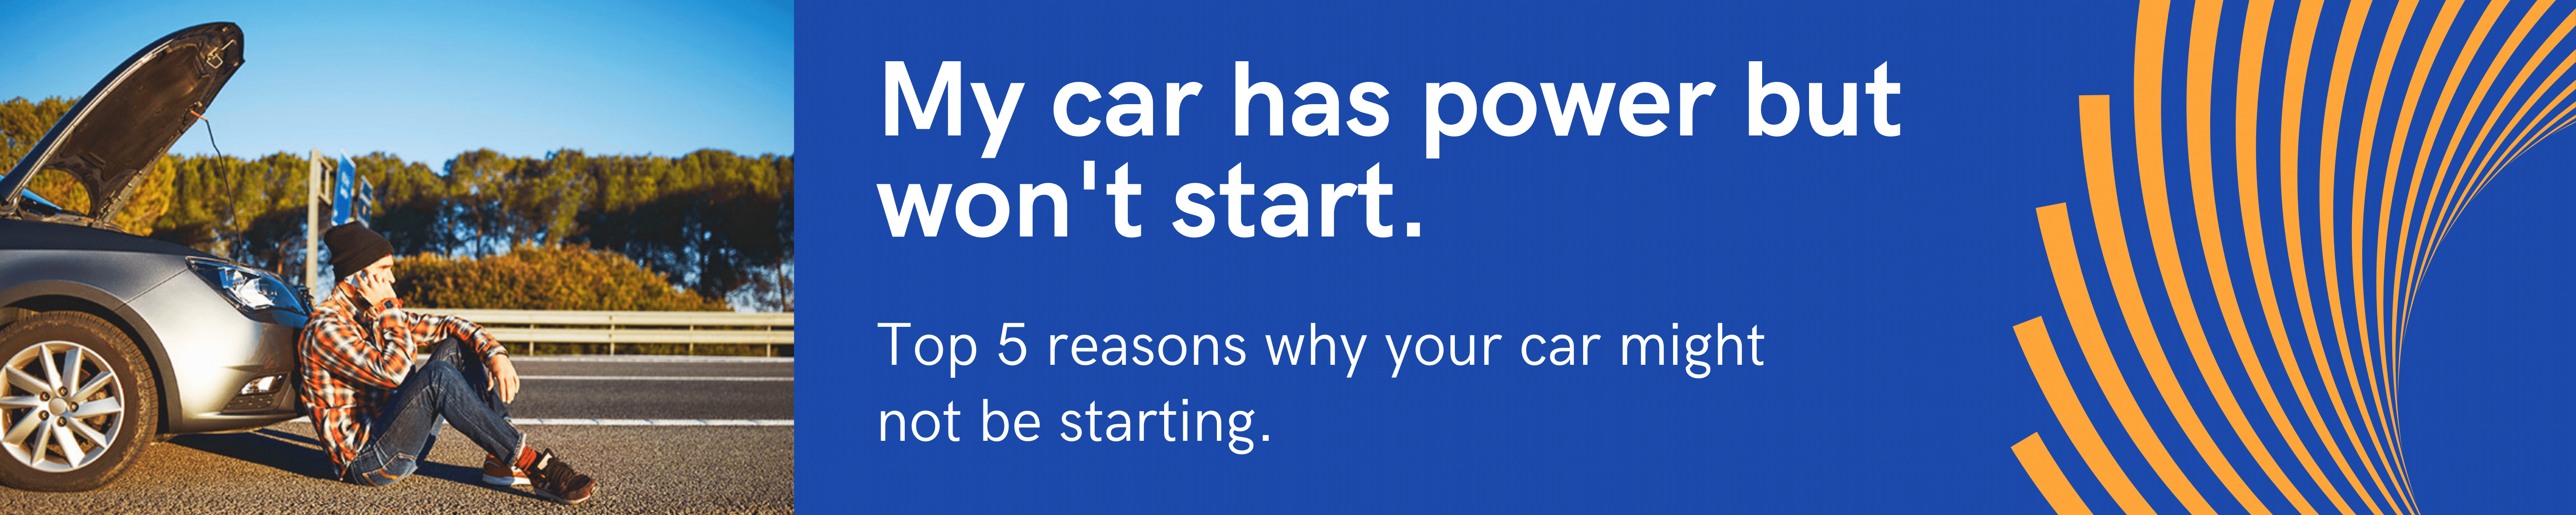 Why does my car have power but won't start?